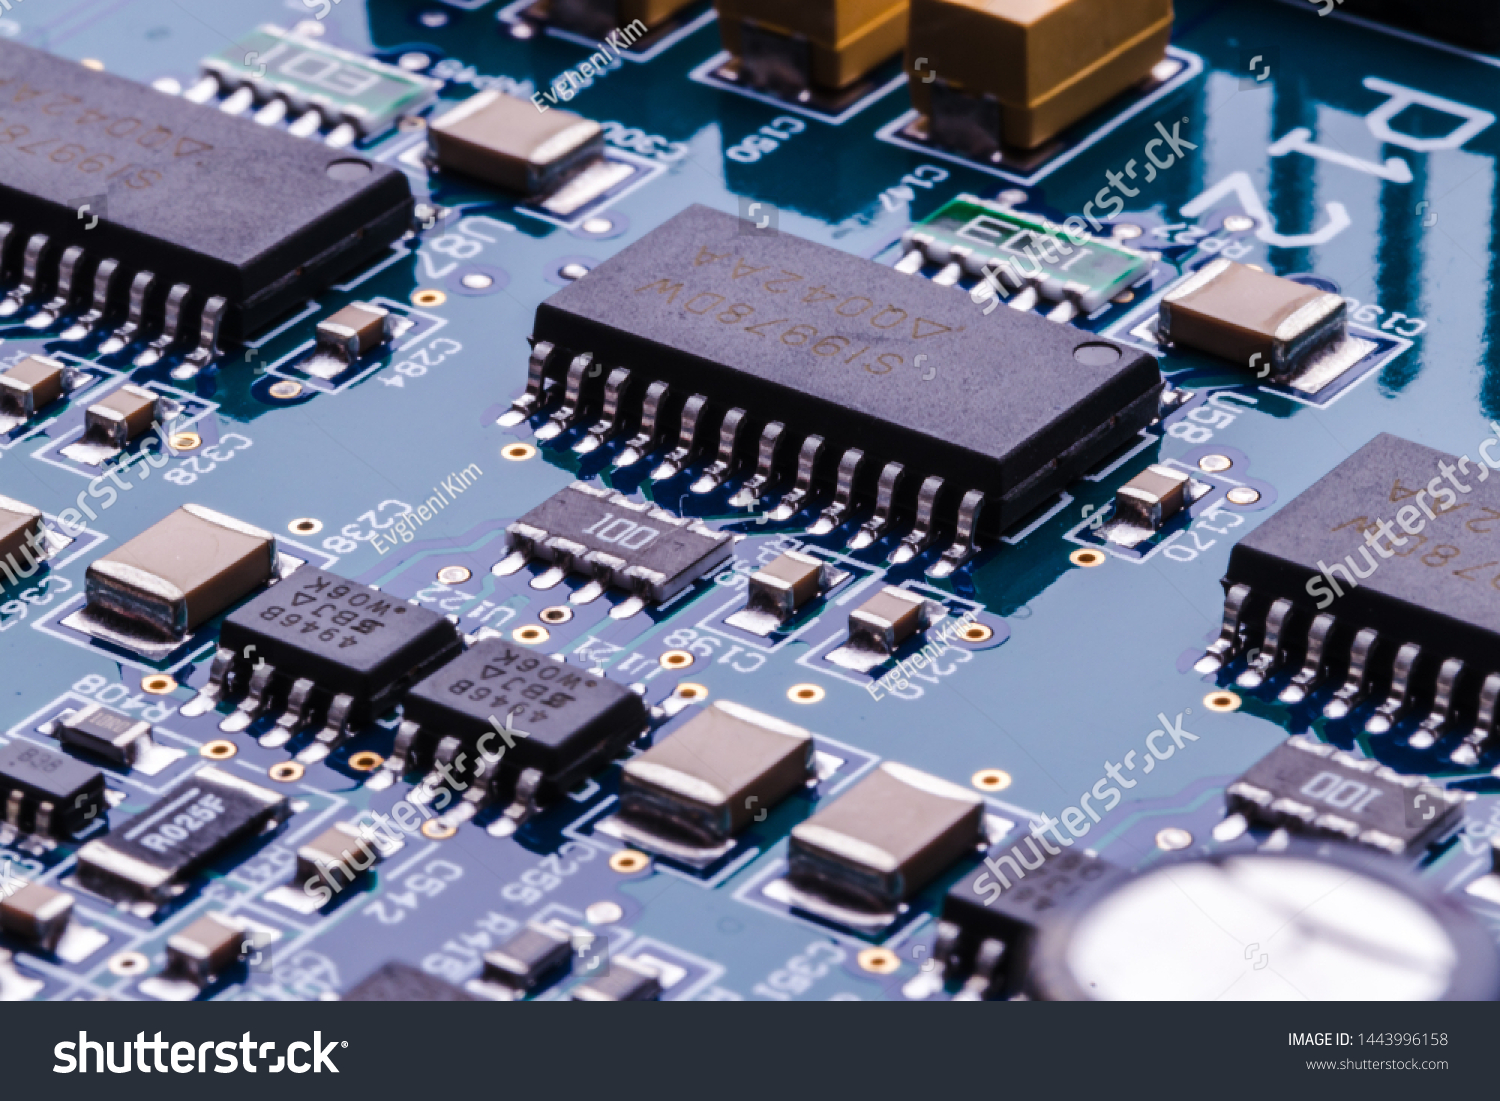 Close-up image of various parts of the computer chip. #1443996158